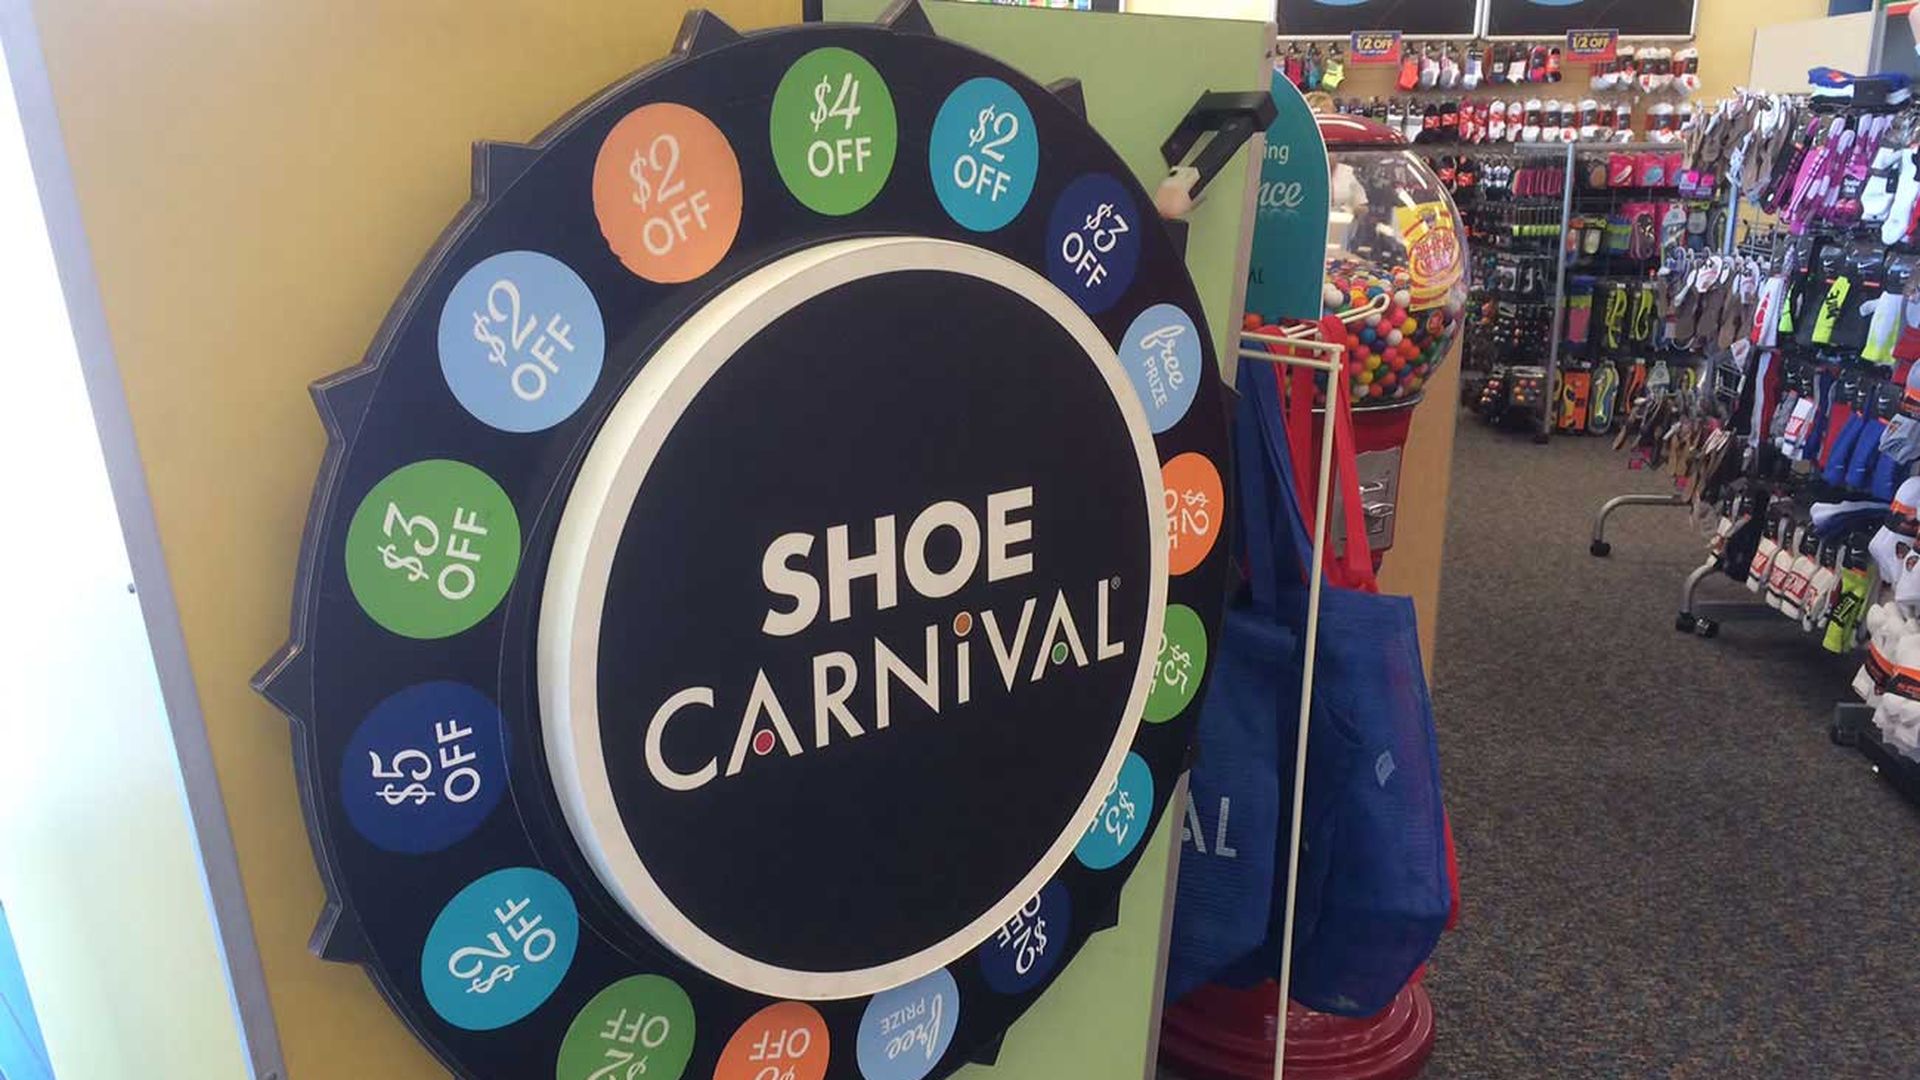 Shoe Carnival on the App Store